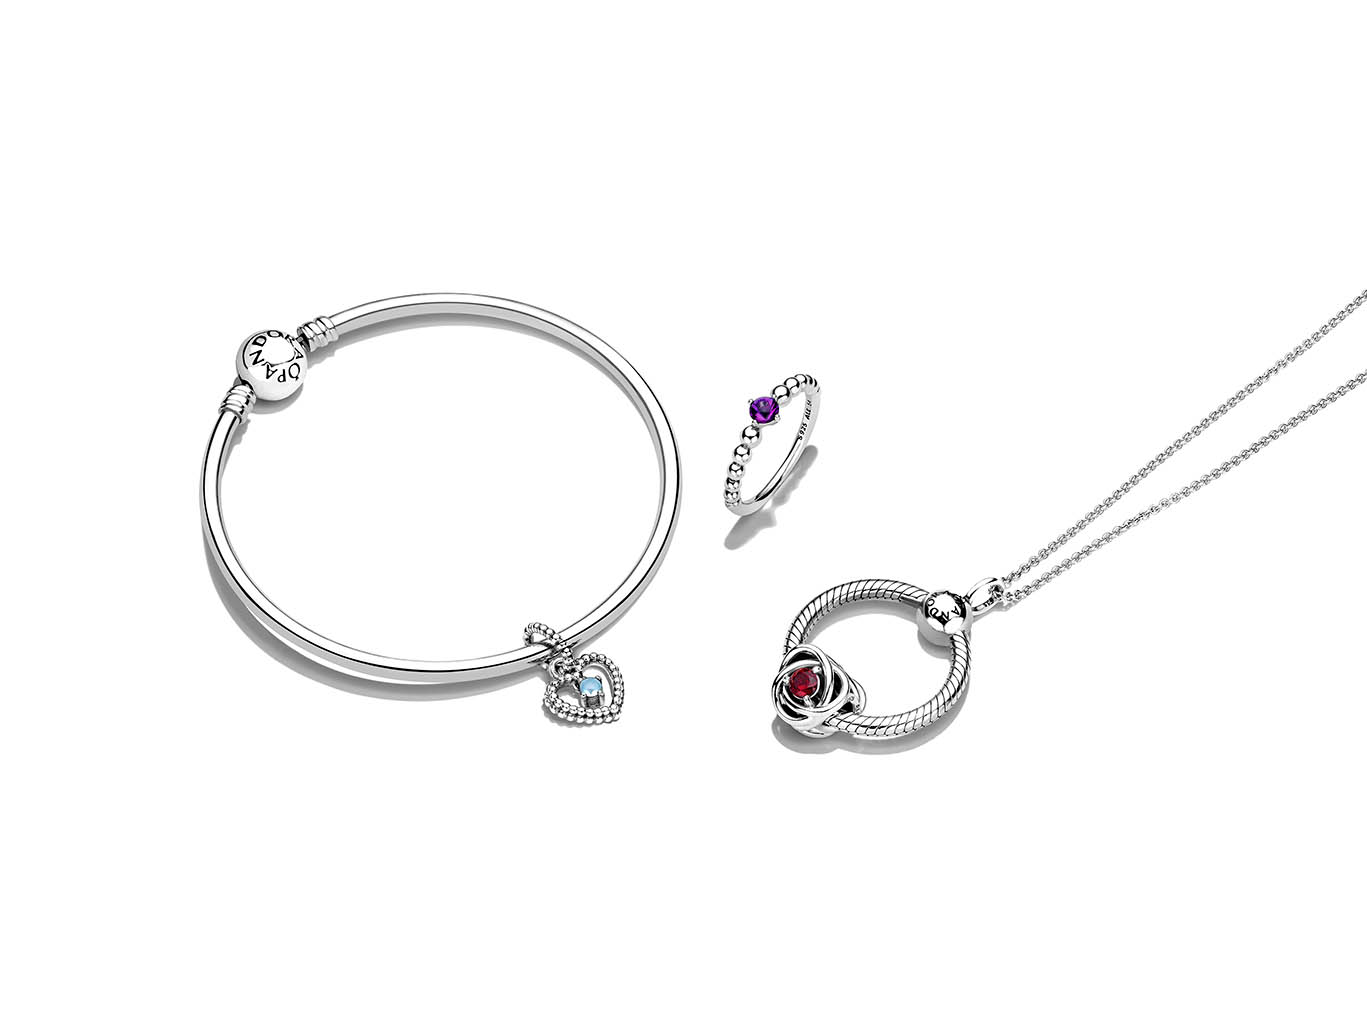 Advertising Still Life Product Photography of Pandora jewellery bracelet ring and necklace set by Packshot Factory